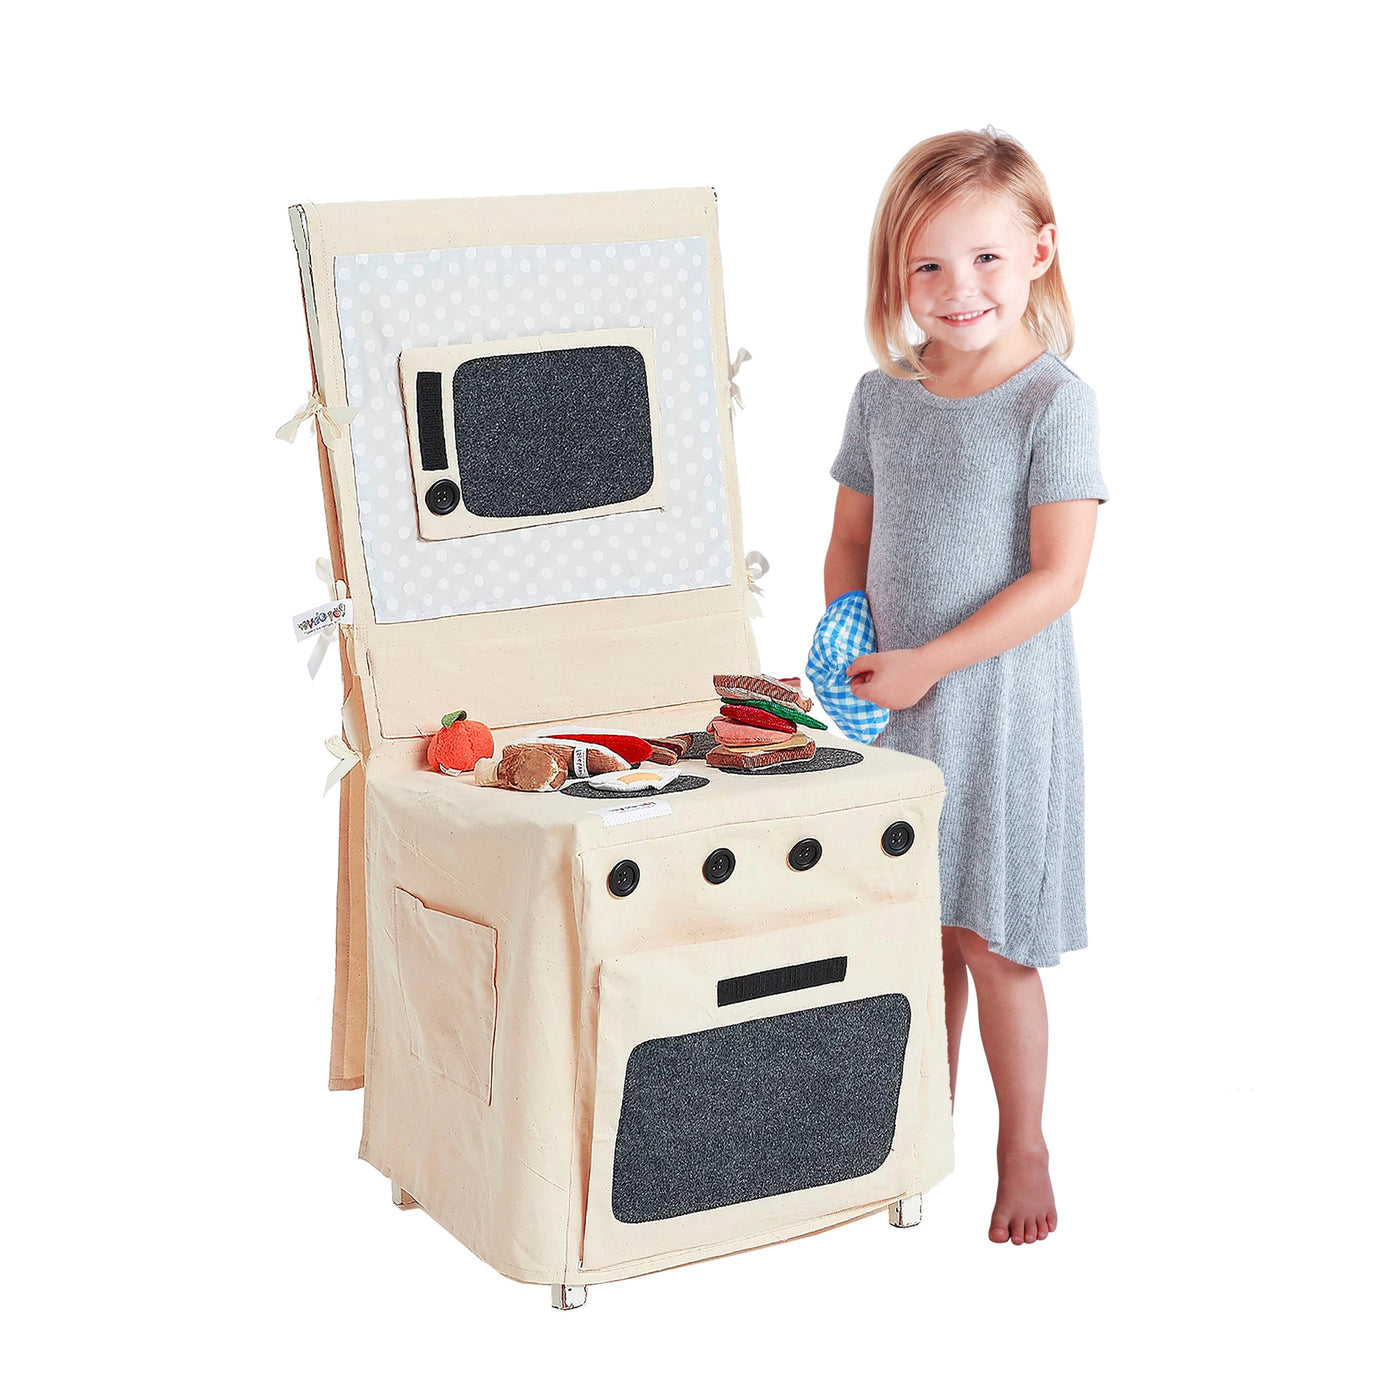 PopOhVer Stove Set Deluxe Playset